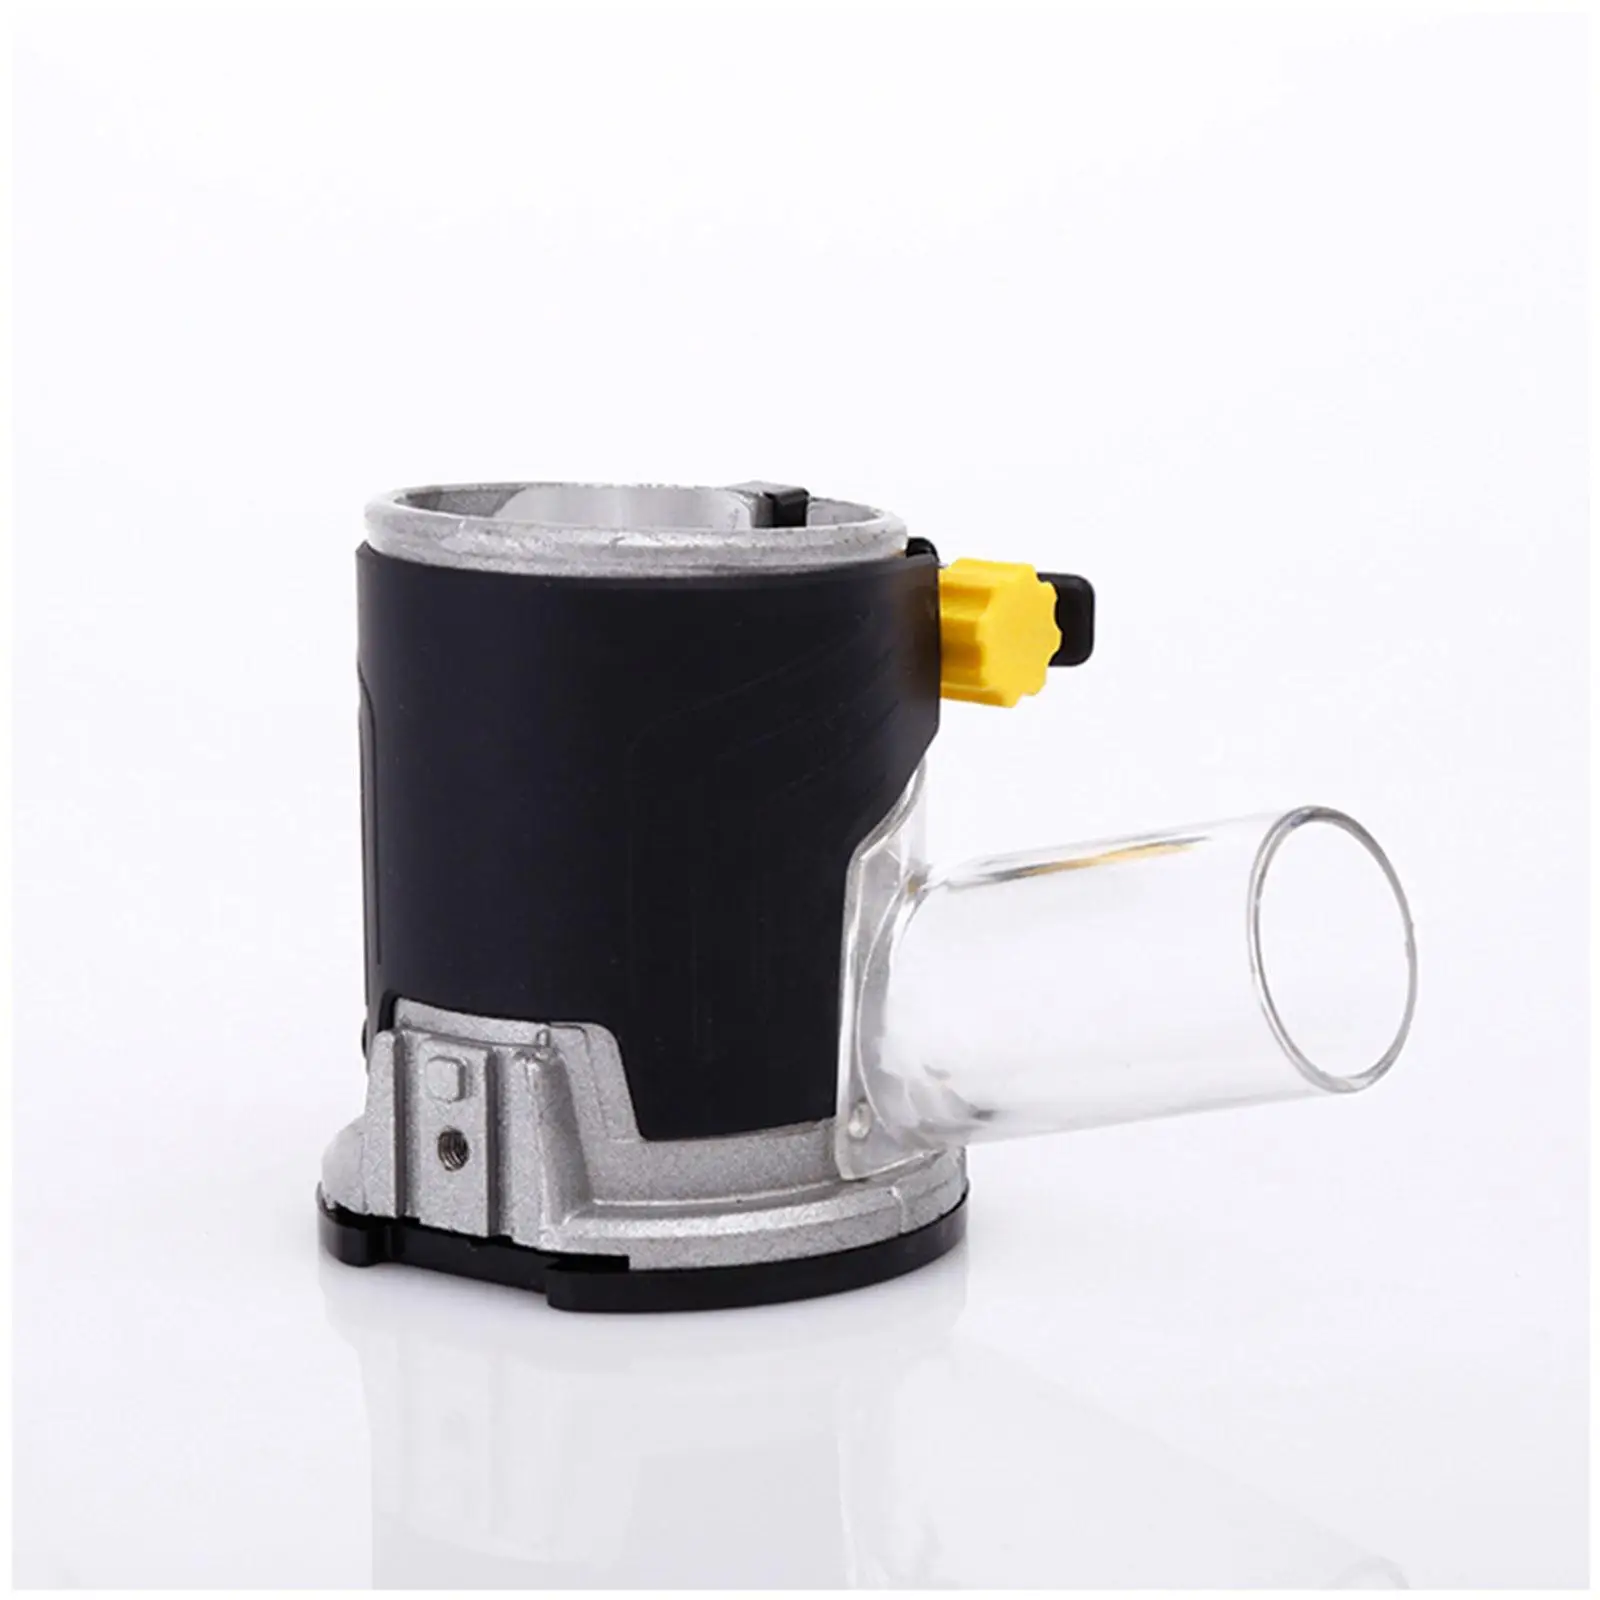 Milling Machine Base Trimming Parts Vacuum Cleaner Power Tool for route